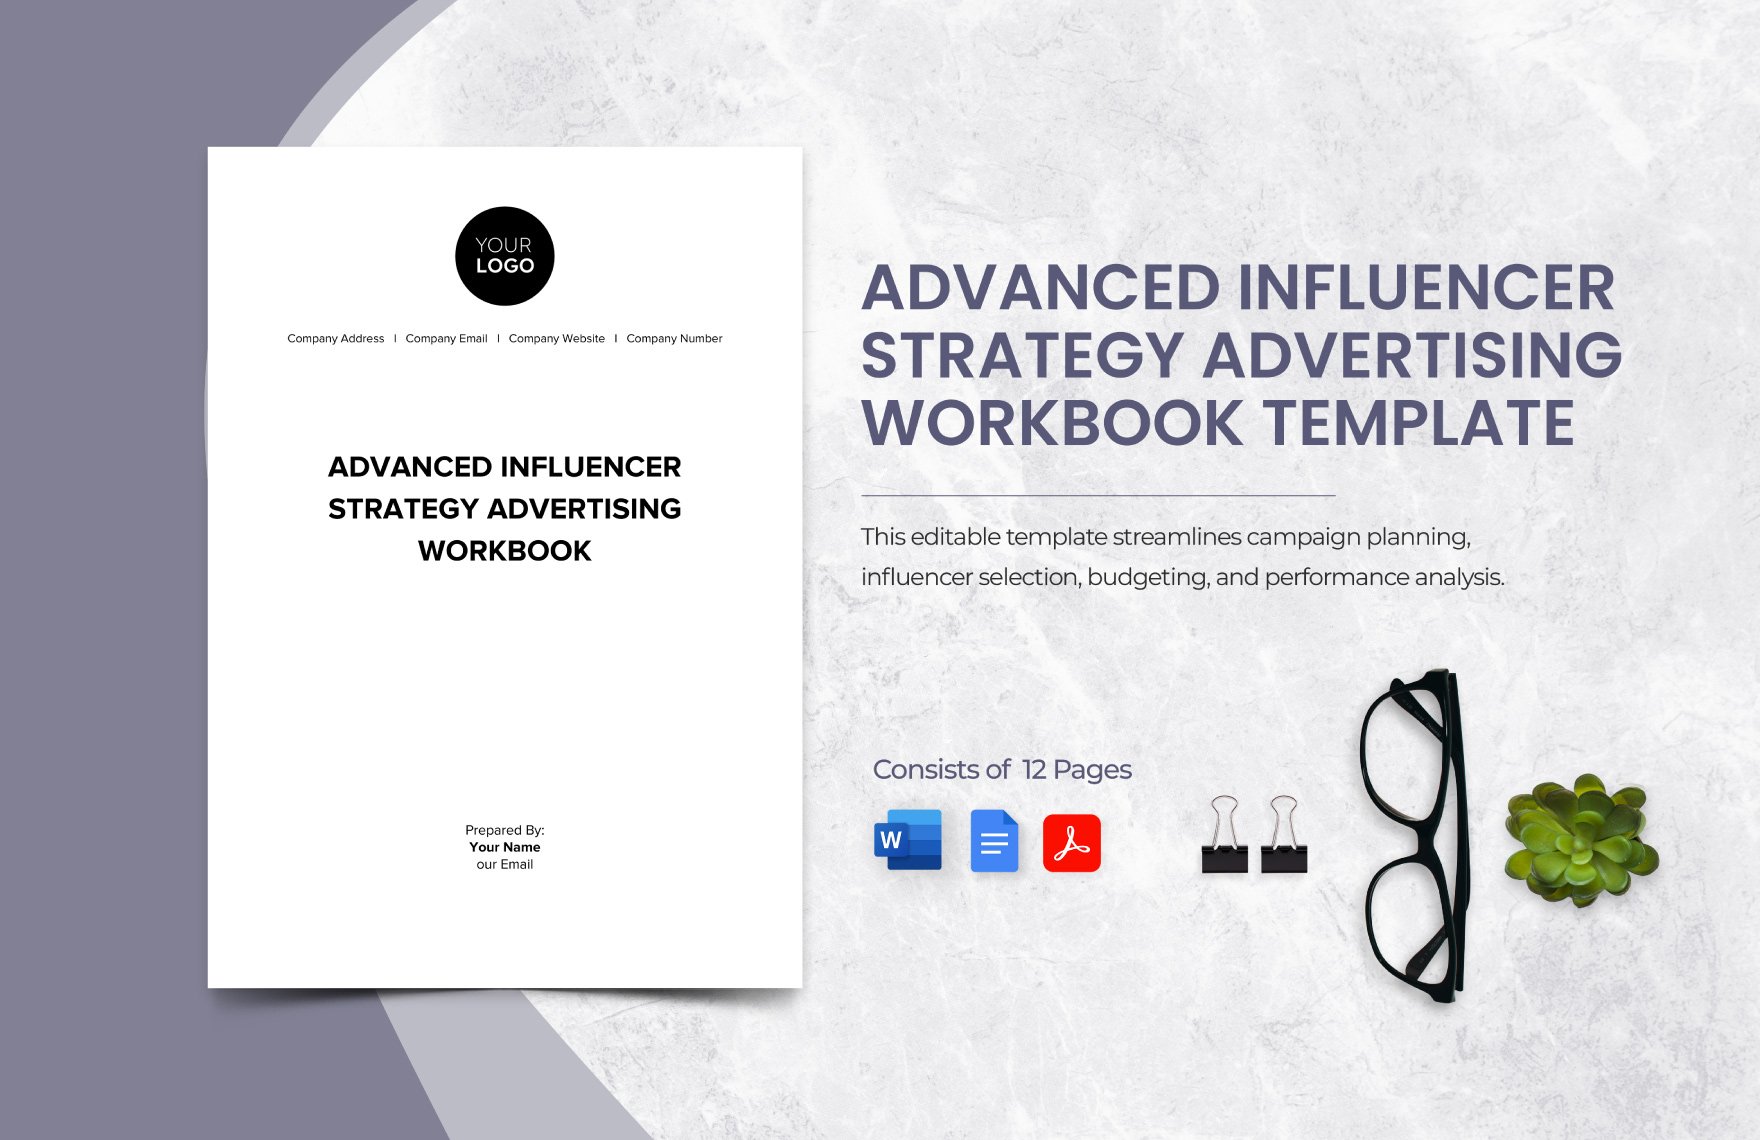 Advanced Influencer Strategy Advertising Workbook Template in Word, Google Docs, PDF